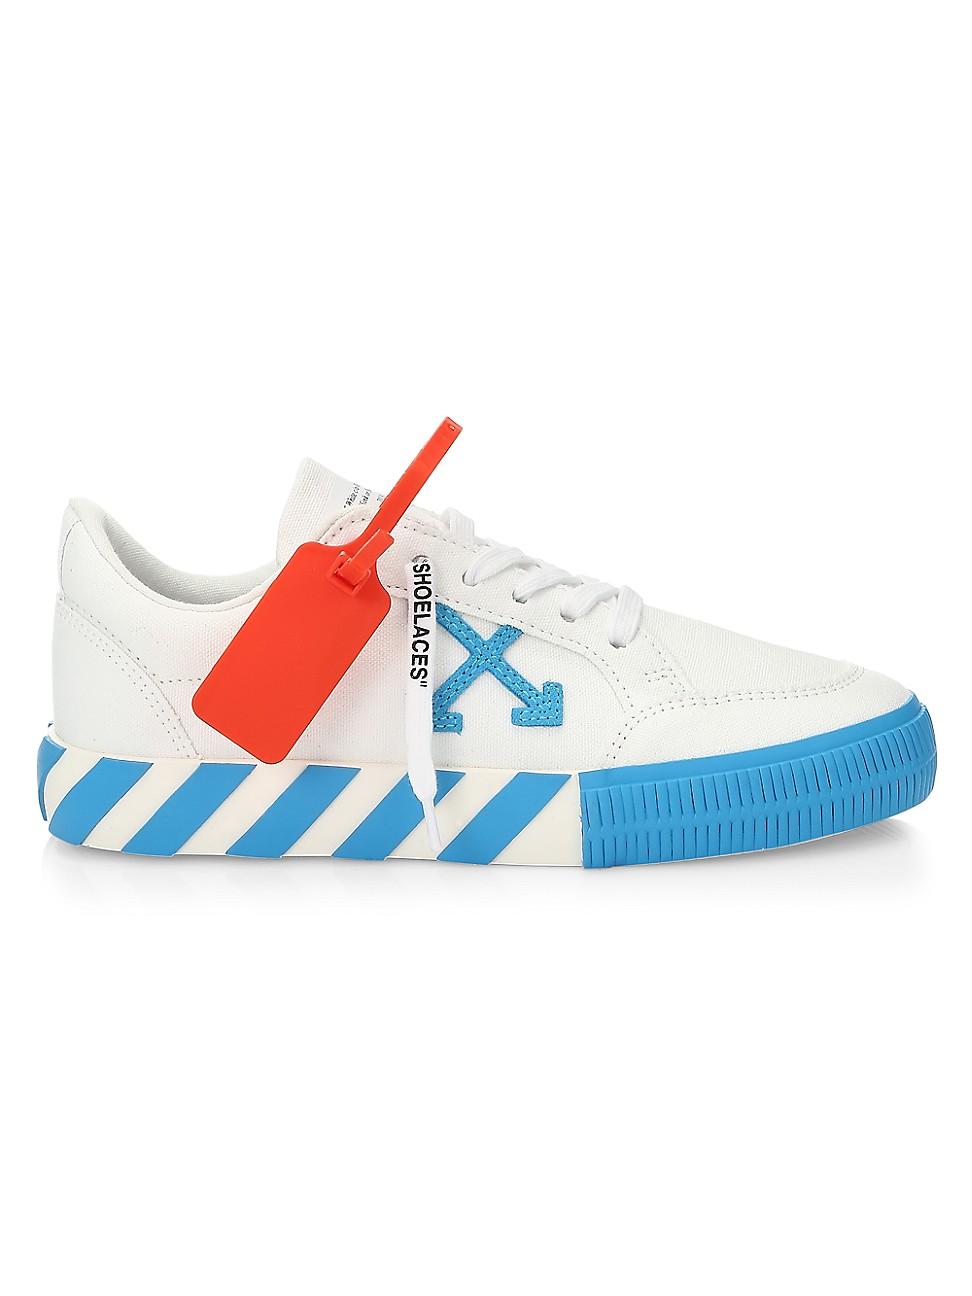 Off White Blue And White Sneakers Hotsell, SAVE 46% - aveclumiere.com